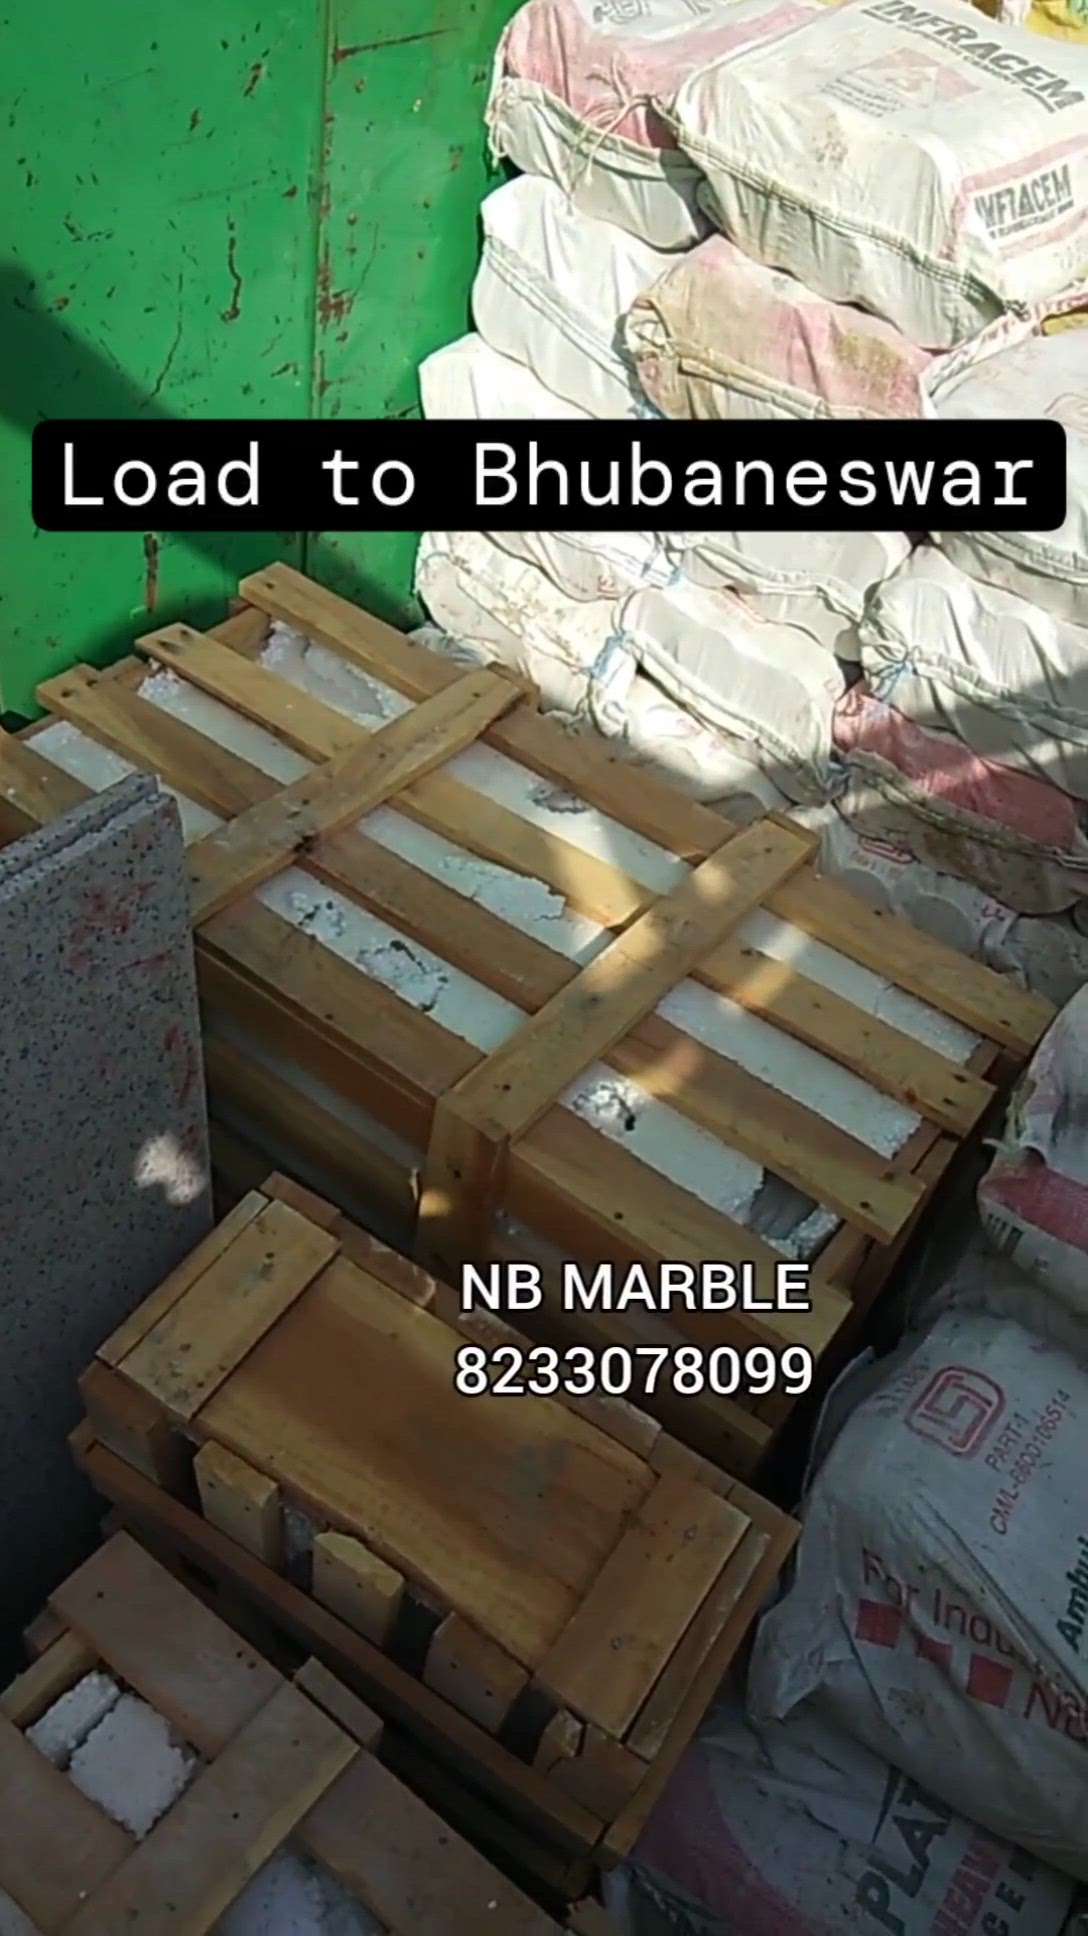 Load to Bhubaneswar

NB MARBLE

We are manufacturer of marble and sandstone Fountain, Inlay work, Sculpture, Temple 

We make any design according to your requirement and size 

Follow me @nbmarble 

More information contact me
082330 78099 

#fountain #templearchitecture #homedecor #MarbleFountain #stoneart #nbmarble #gardendecor #gardenfountain #waterfountain #inlaywork